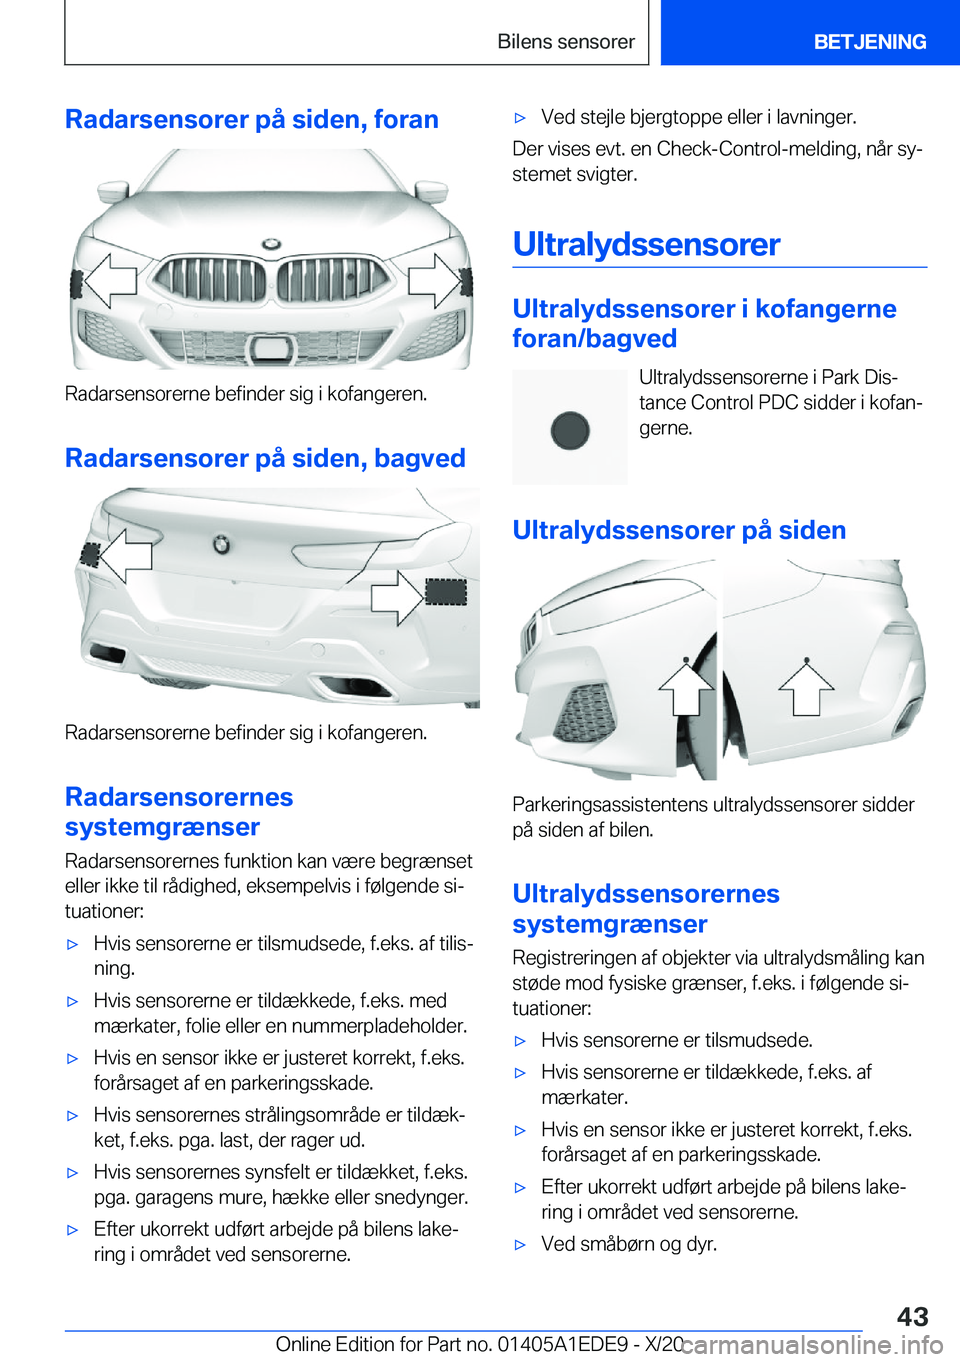 BMW 8 SERIES CONVERTIBLE 2021  InstruktionsbØger (in Danish) �R�a�d�a�r�s�e�n�s�o�r�e�r��p�å��s�i�d�e�n�,��f�o�r�a�n
�R�a�d�a�r�s�e�n�s�o�r�e�r�n�e��b�e�f�i�n�d�e�r��s�i�g��i��k�o�f�a�n�g�e�r�e�n�.
�R�a�d�a�r�s�e�n�s�o�r�e�r��p�å��s�i�d�e�n�,��b�a�g